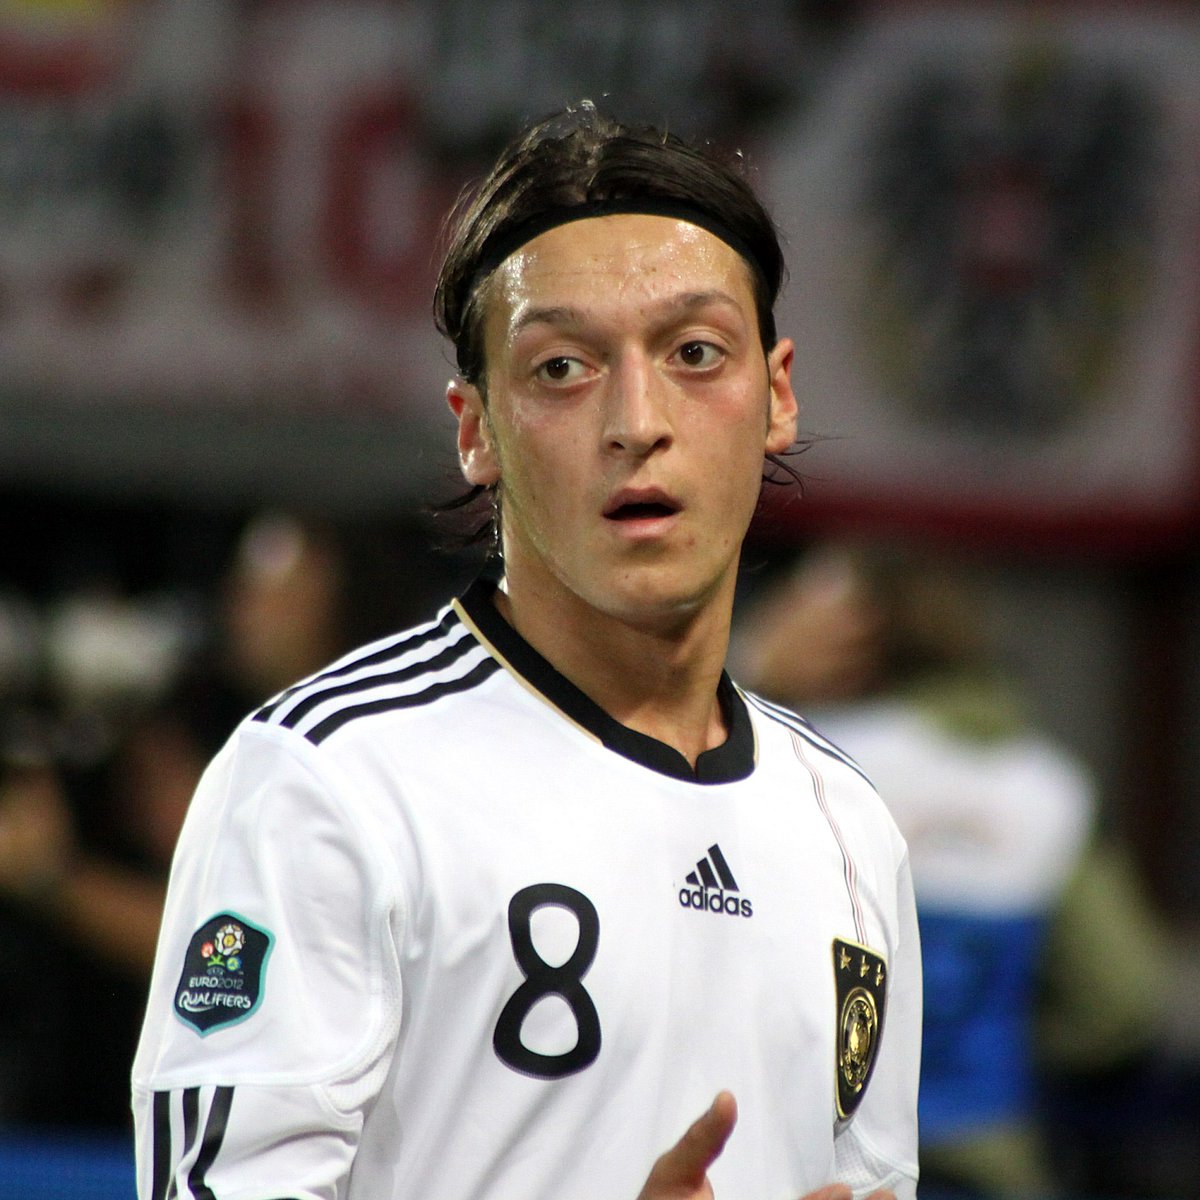 Özil was one of the leading forces in Germany's qualification for UEFA Euro 2012 as Germany won all 10 games to top their group. Özil scored 5 times during the campaign and provided 7 assists, more than any European international during the EURO 2012 qualifications.